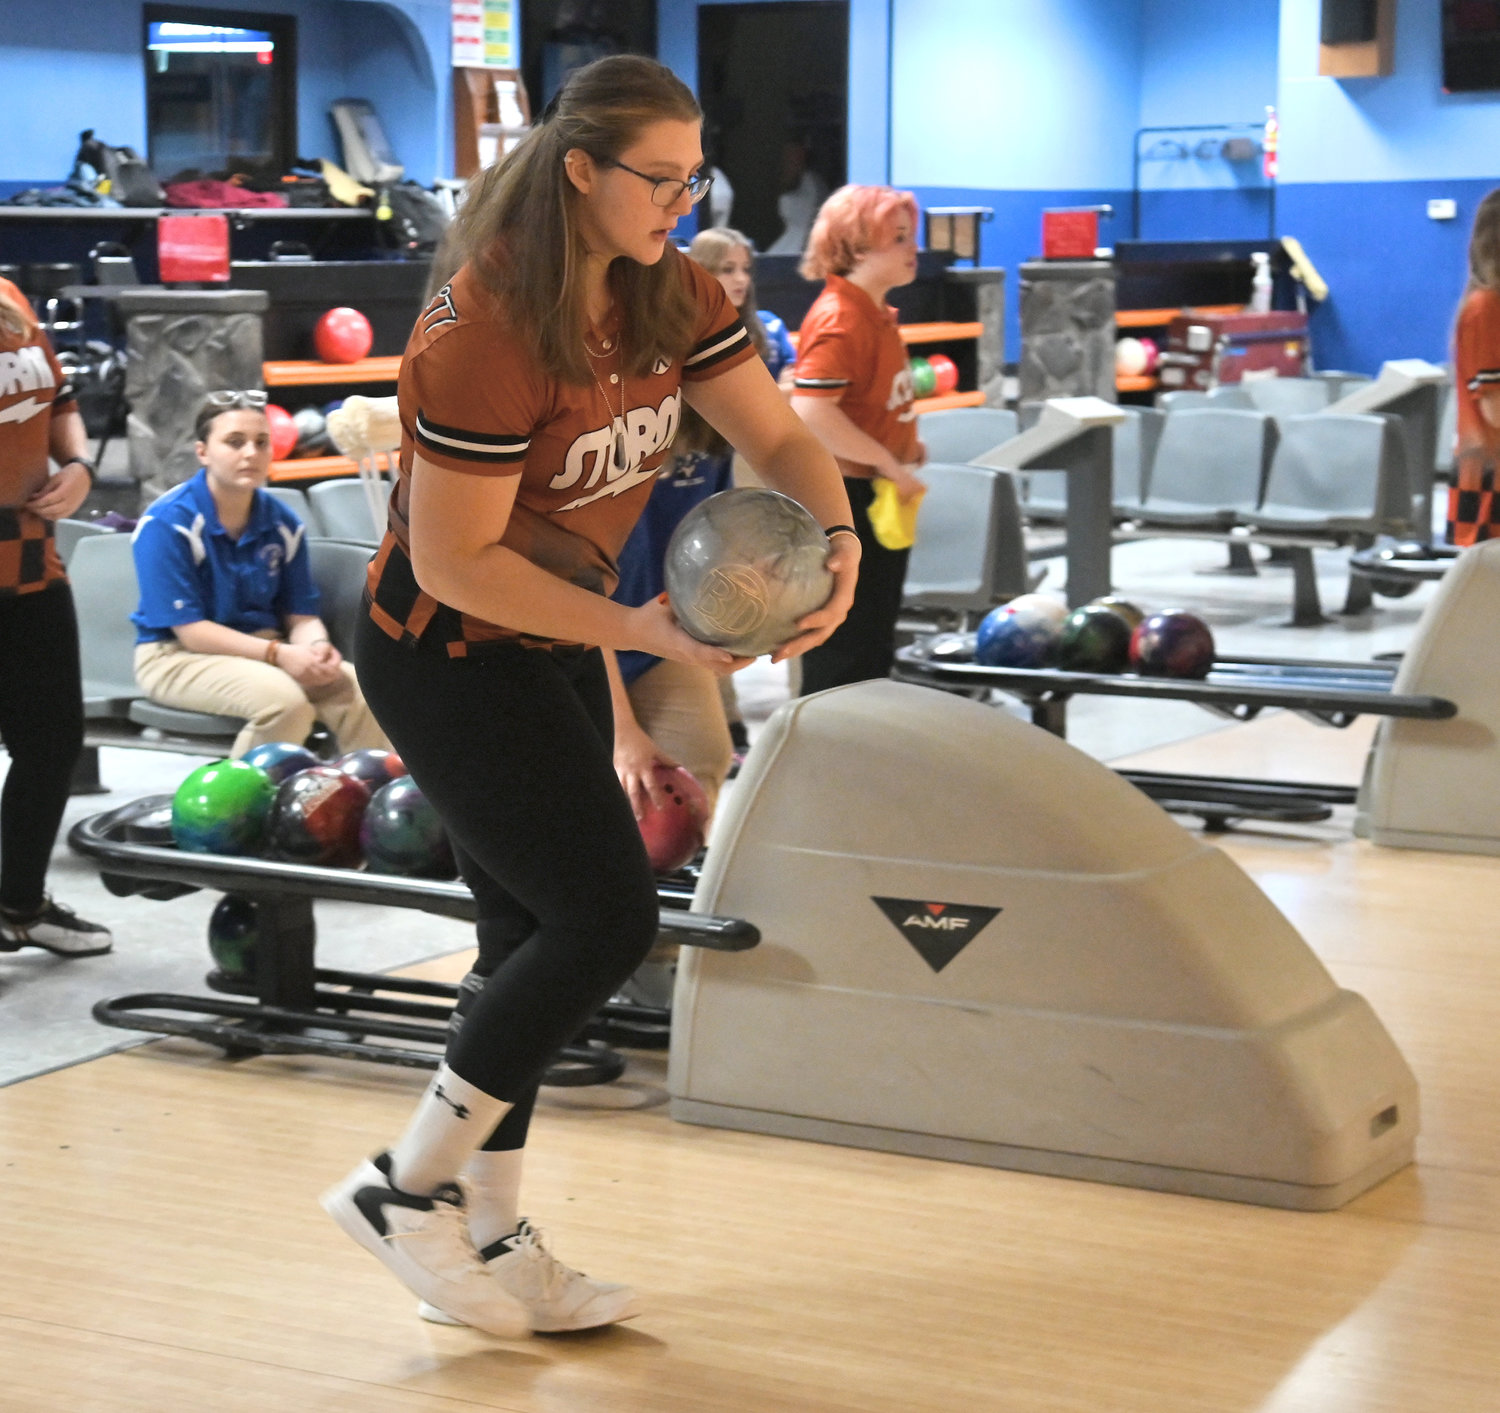 Rome Free Academy's Sophia Iglesias-Tosti makes her approach during a match with Whitesboro on Wednesday at Vista Lanes.